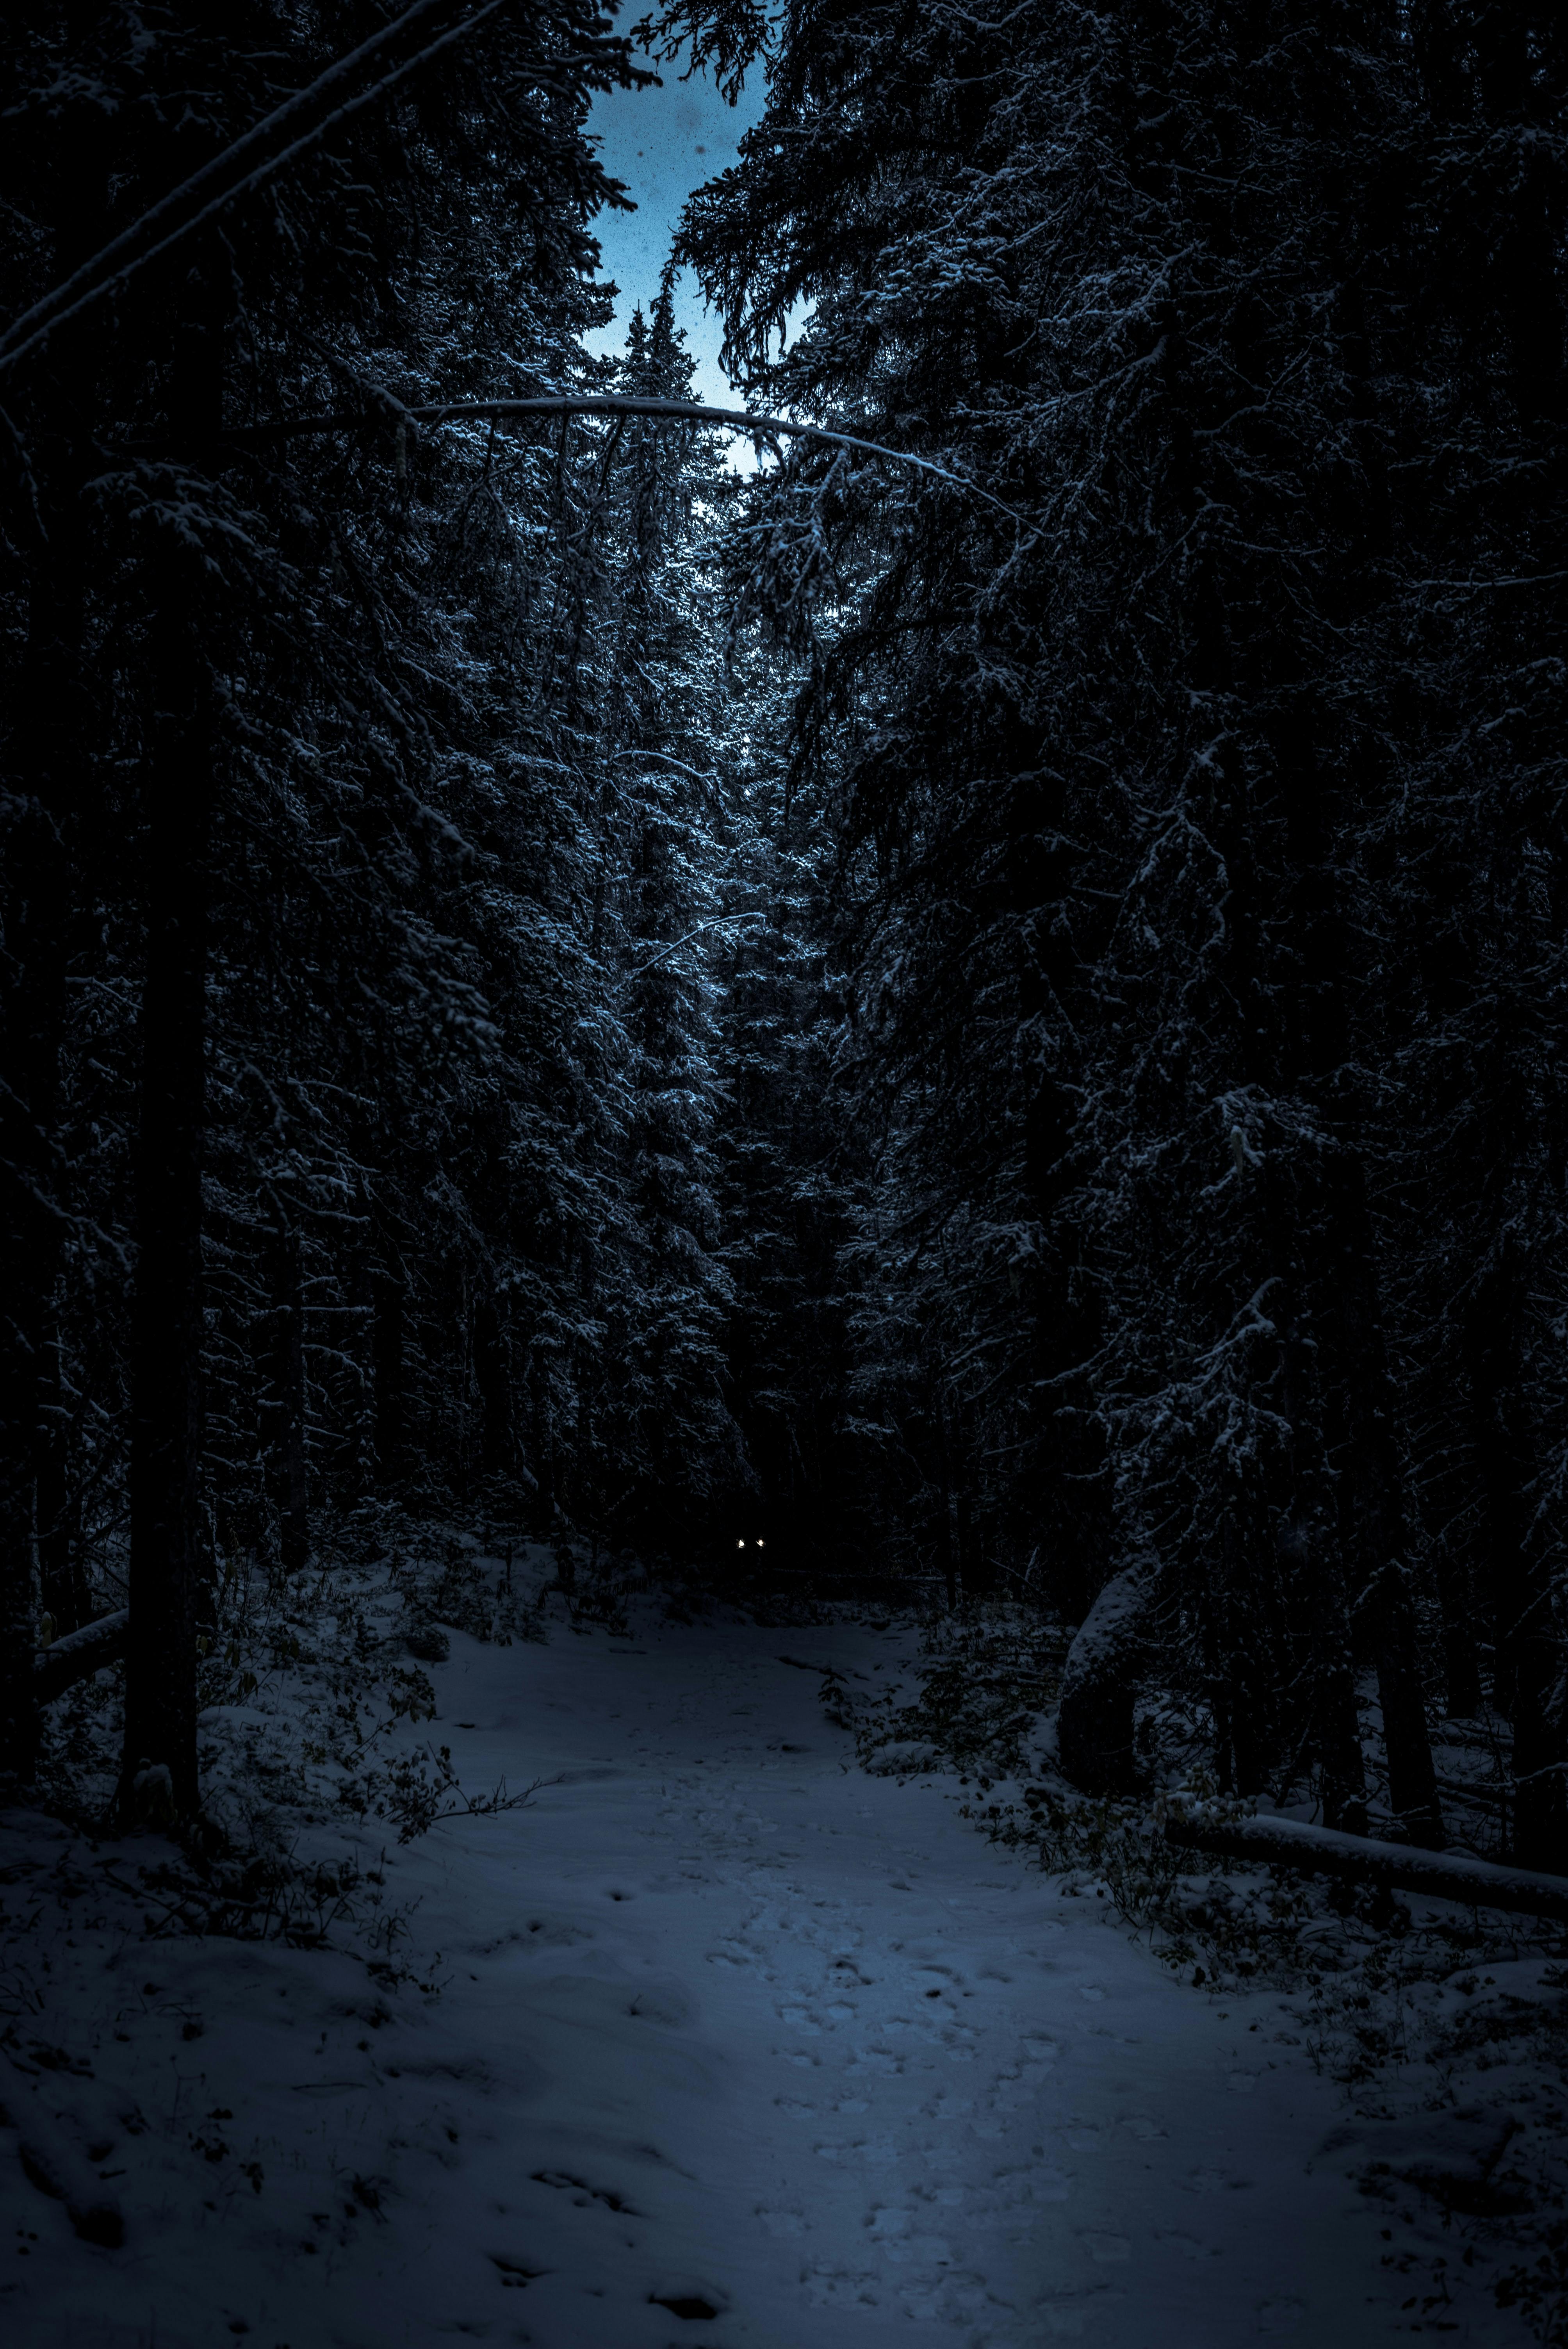 A dark forest scene, two bright animal eyes in the distance